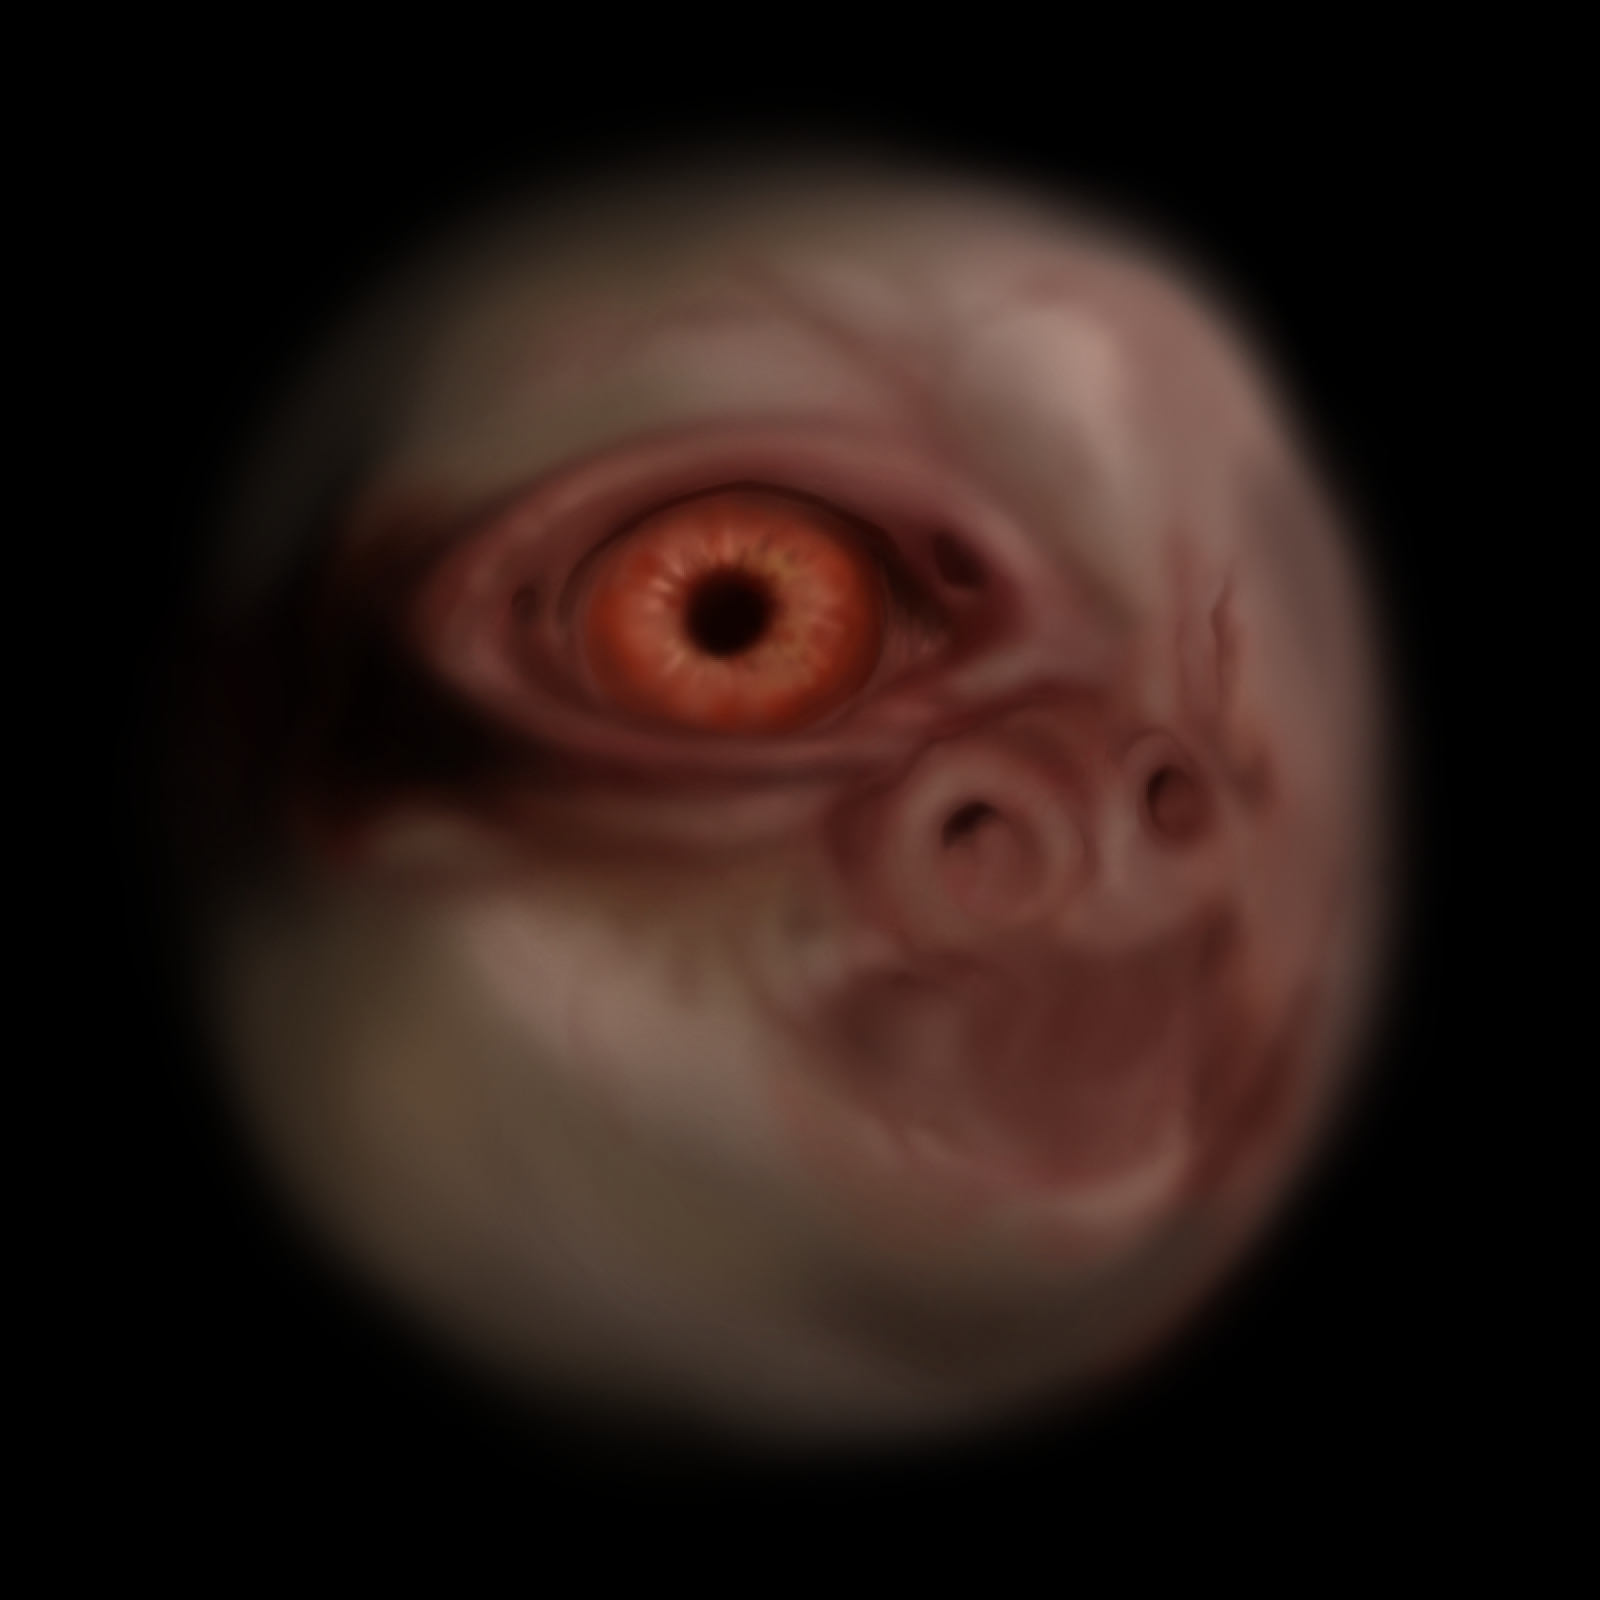 Digital painting on a dark background with a circle of flesh in the middle. The flesh has a strange face with skin over its open mouth, and an orange eye that looks like the pupil is almost a donut, not part of an eyeball